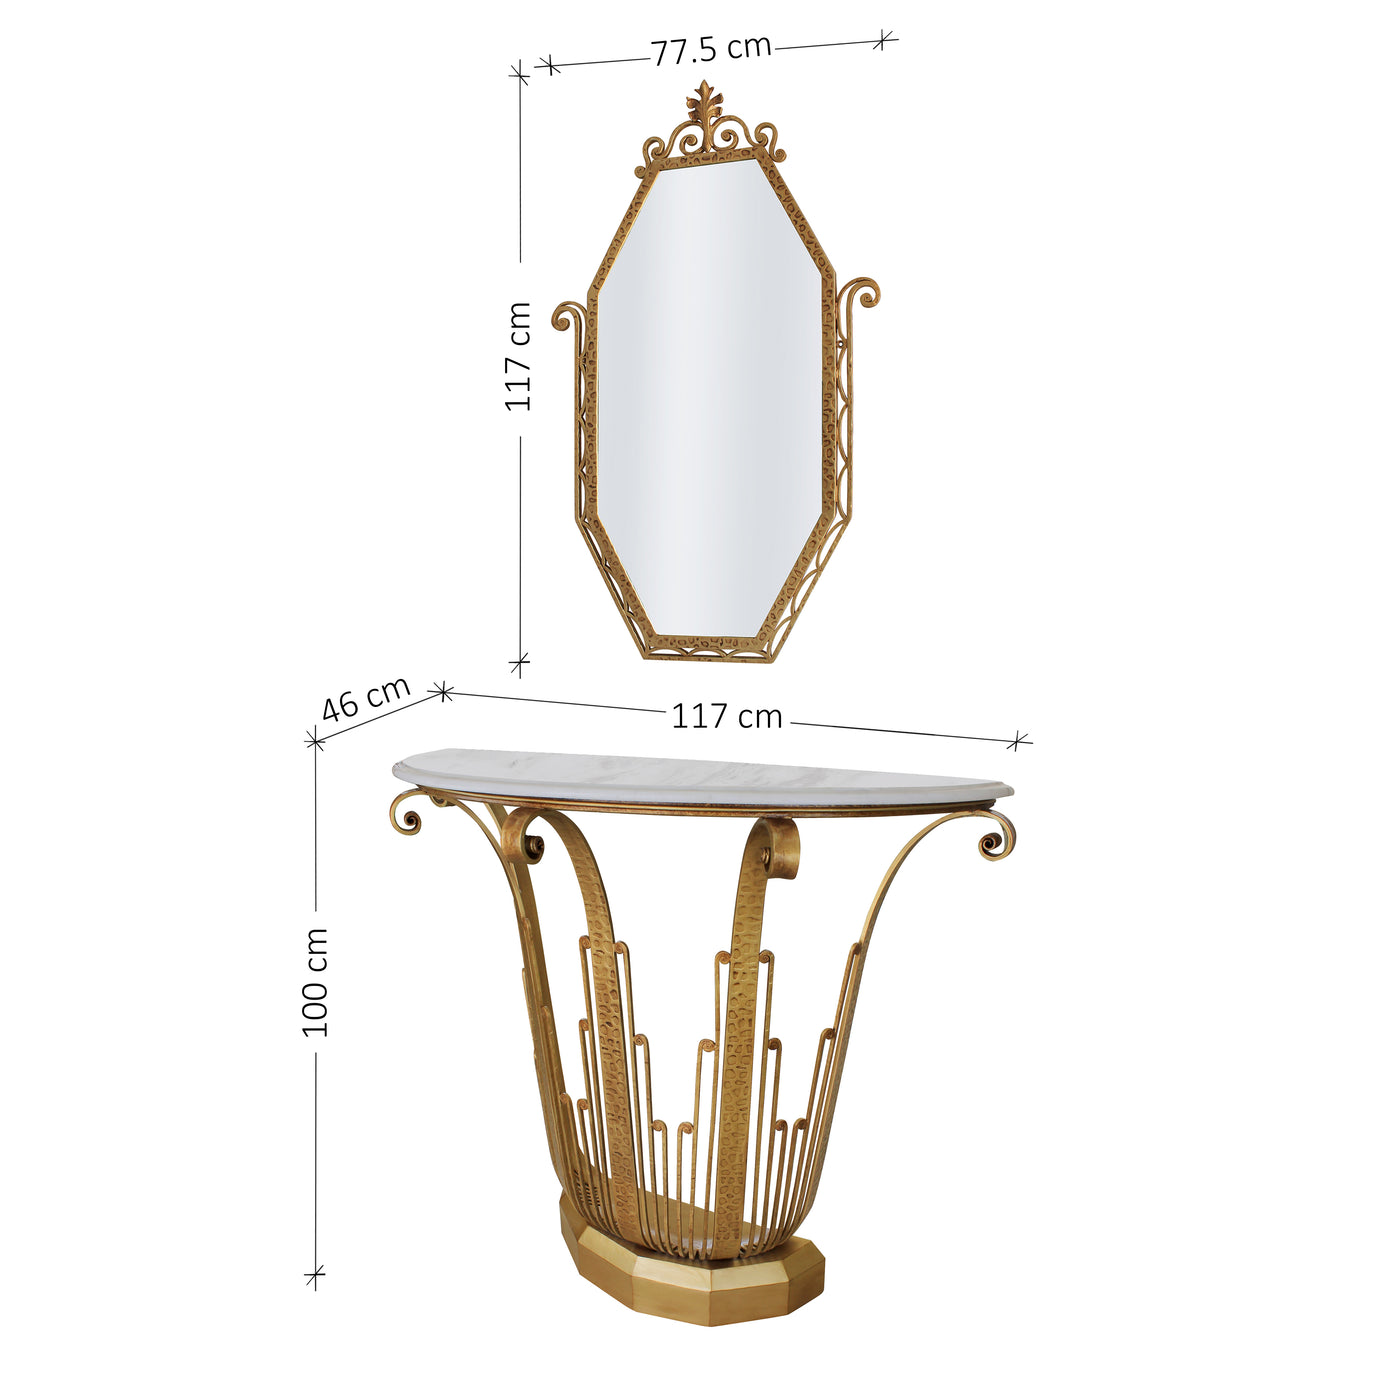 An Art Deco styled handmade metal console and mirror painted in an antique gold finish; with annotated dimensions